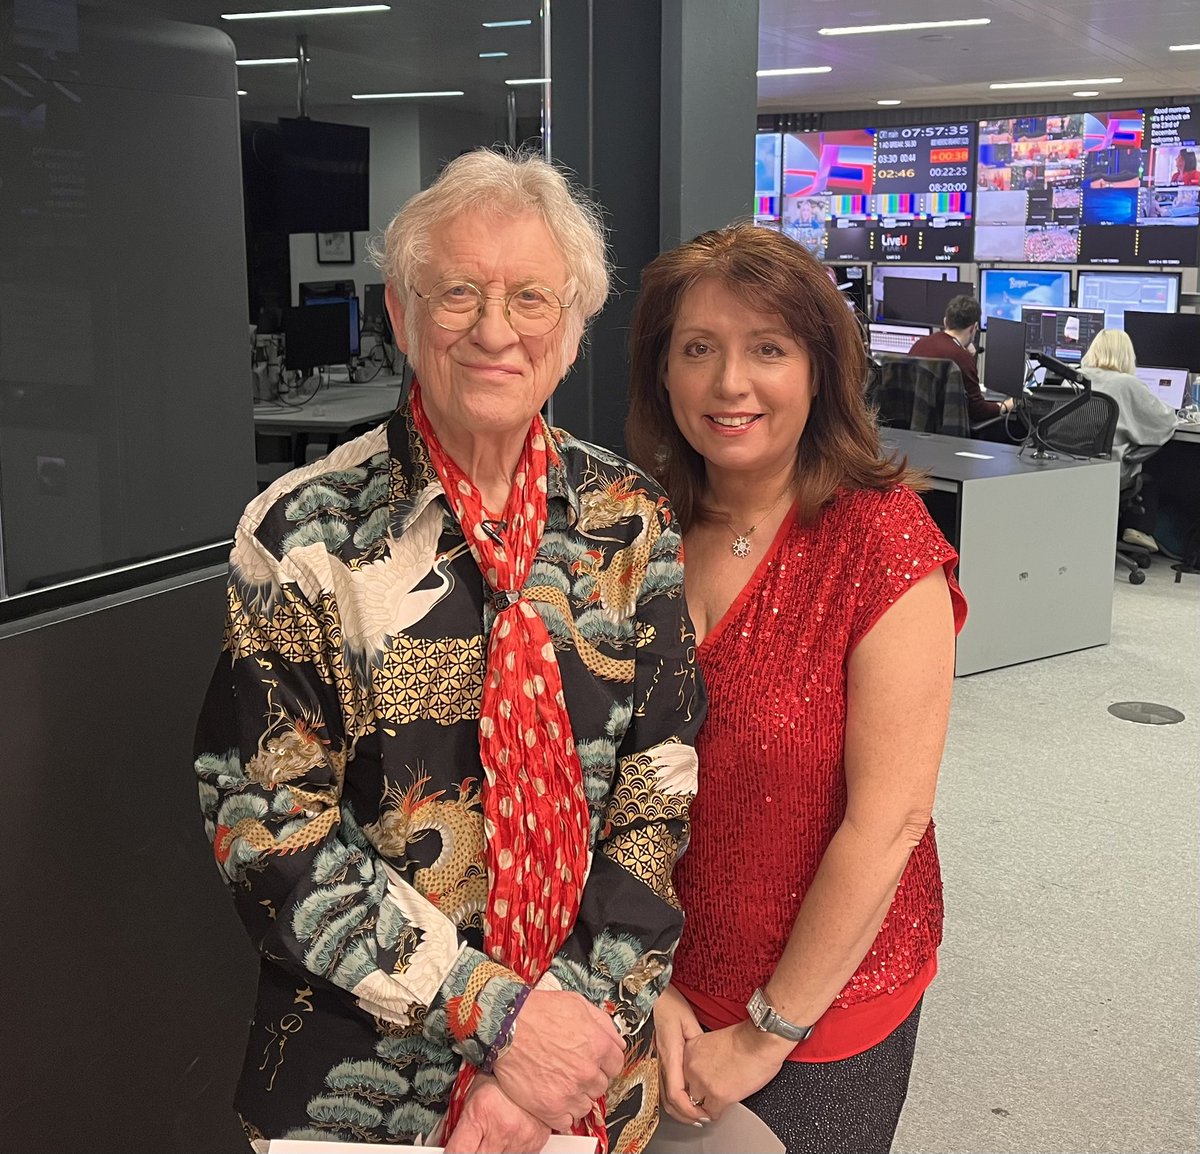 Fun morning chatting with #AnneDiamond & @PipTomson on the best breakfast show @GBNEWS #NoddyHolder even behaved himself (mostly) 🤣